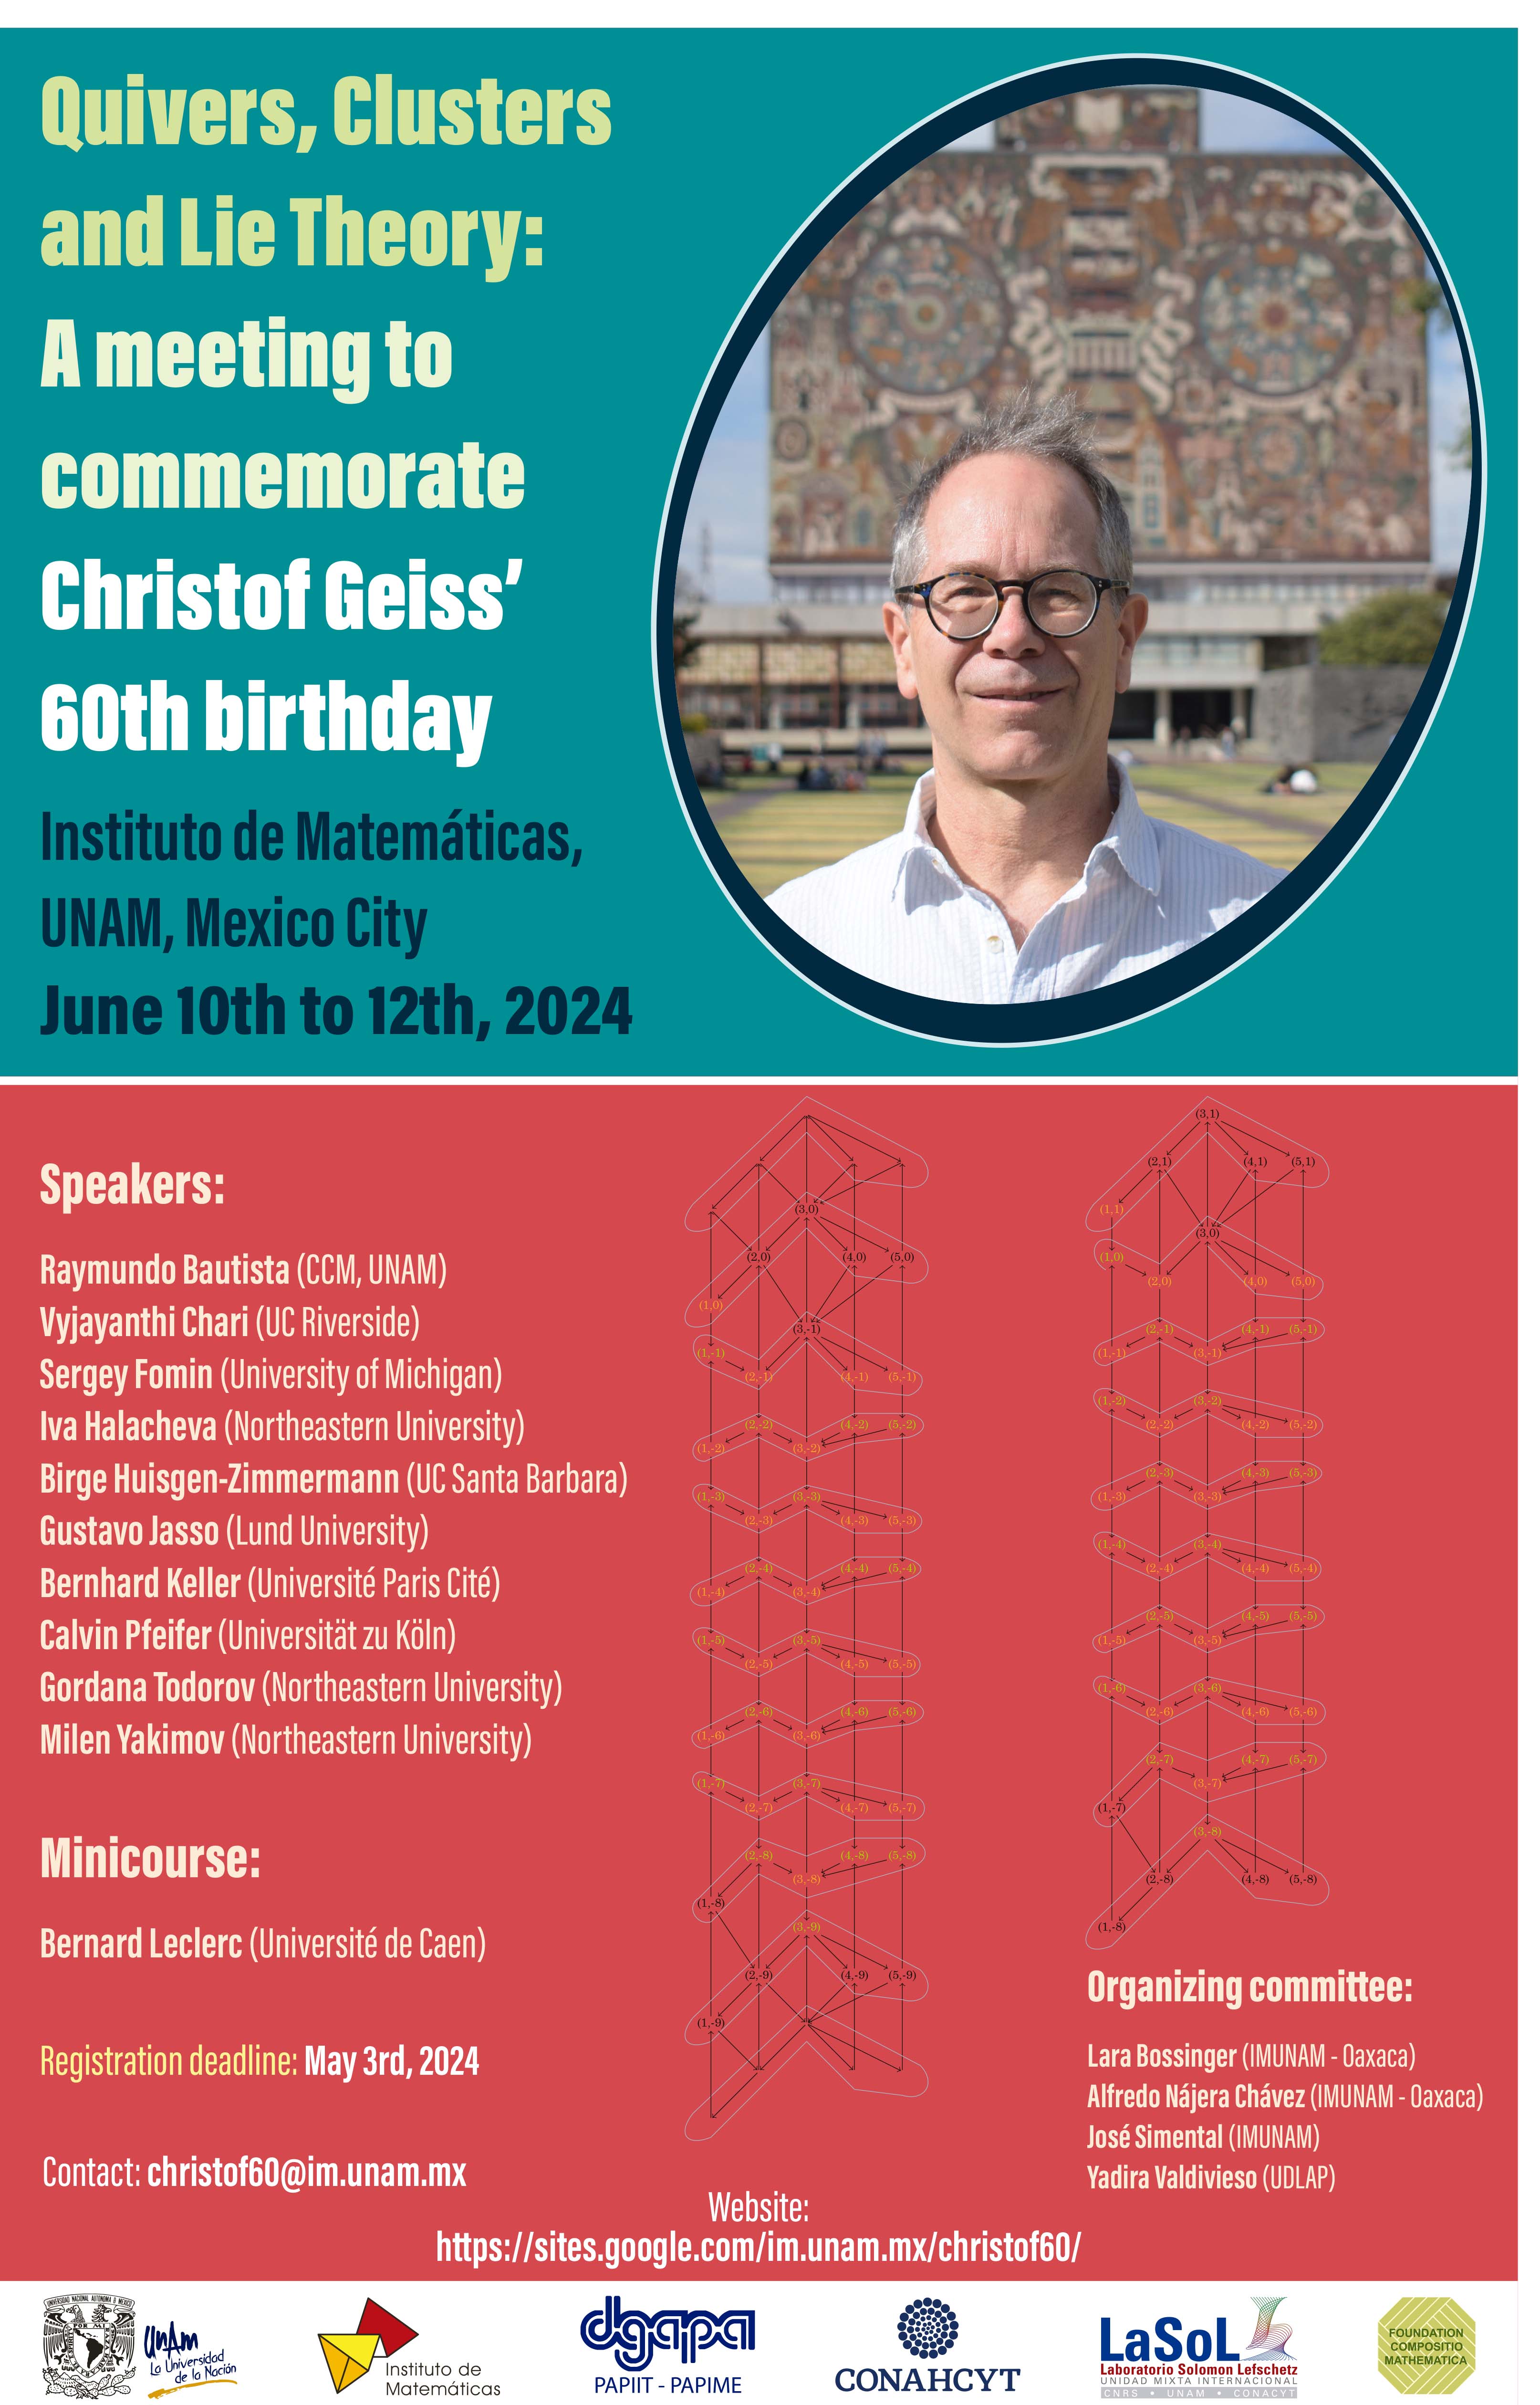 Quivers, Clusters and Lie Theory: A meeting to commemorate Christof Geiss’ 60th